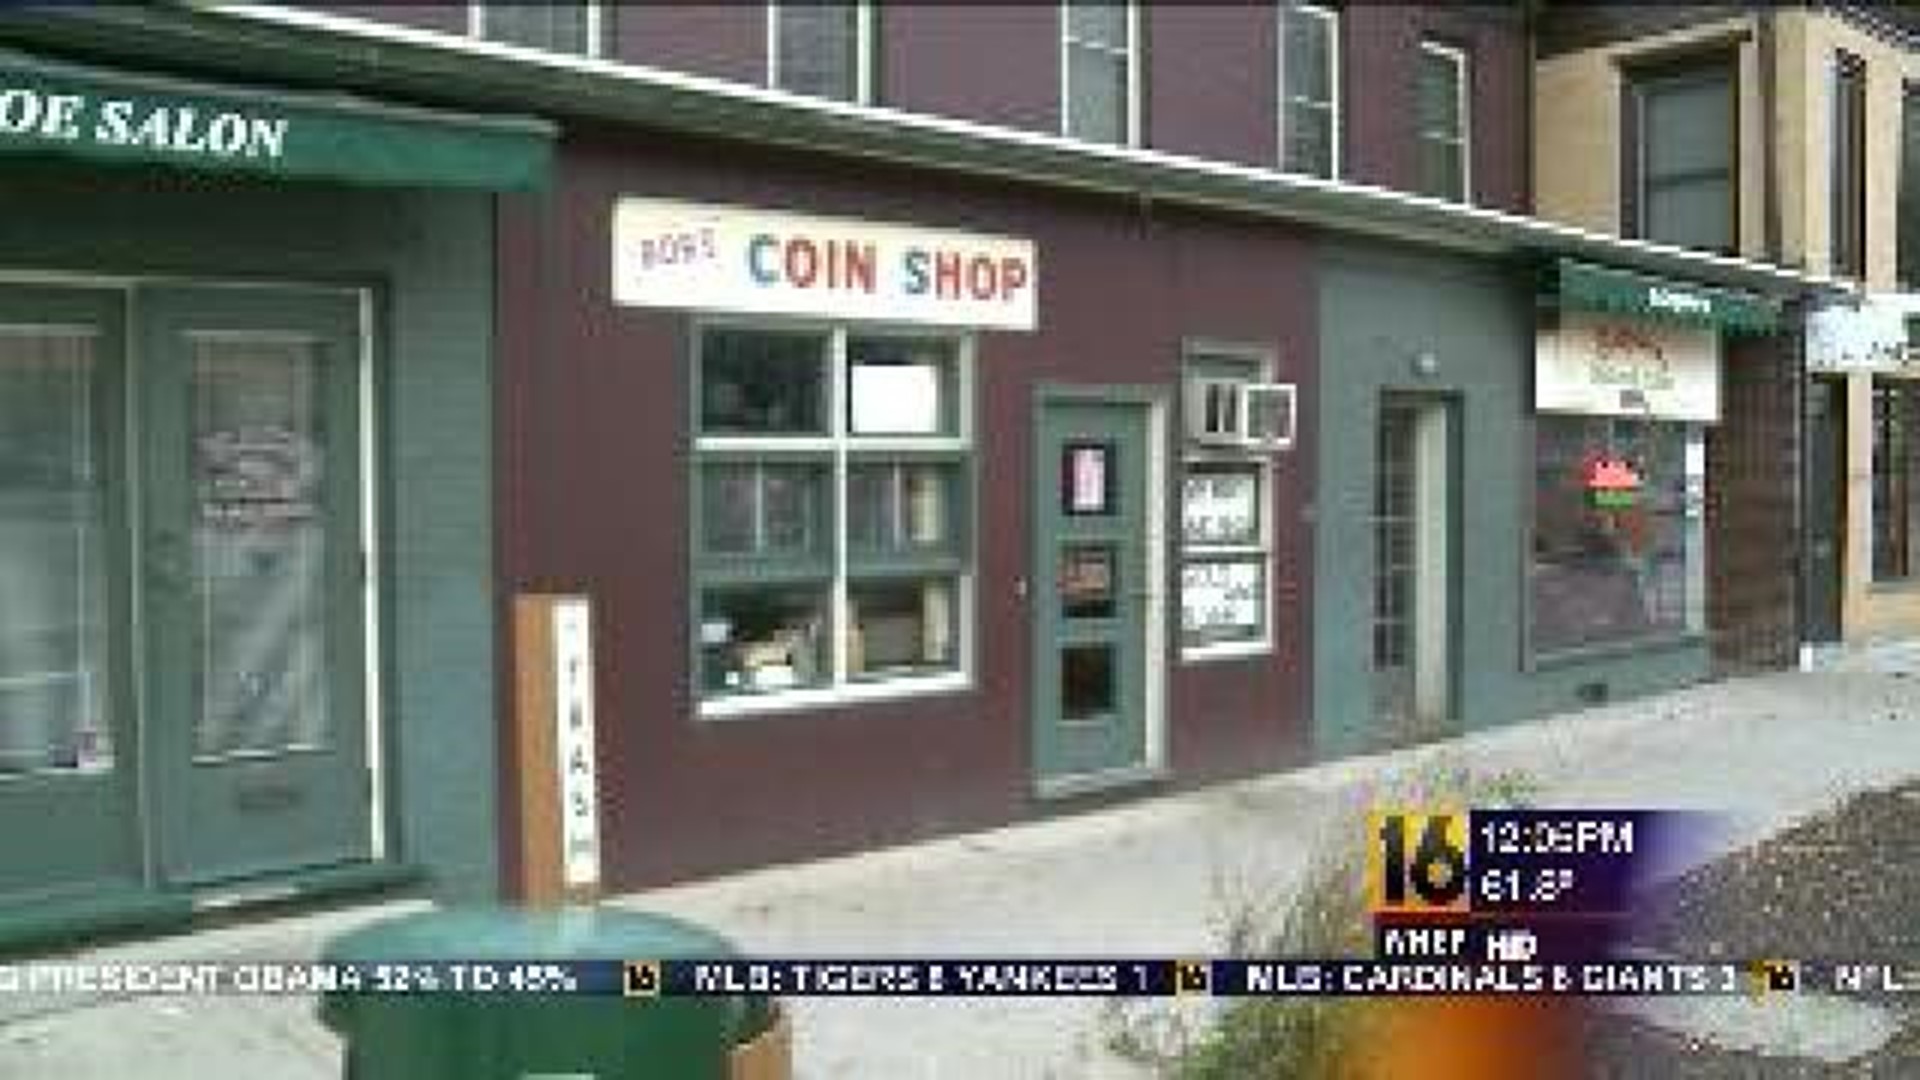 More Charges In Pawn Shop Break-In